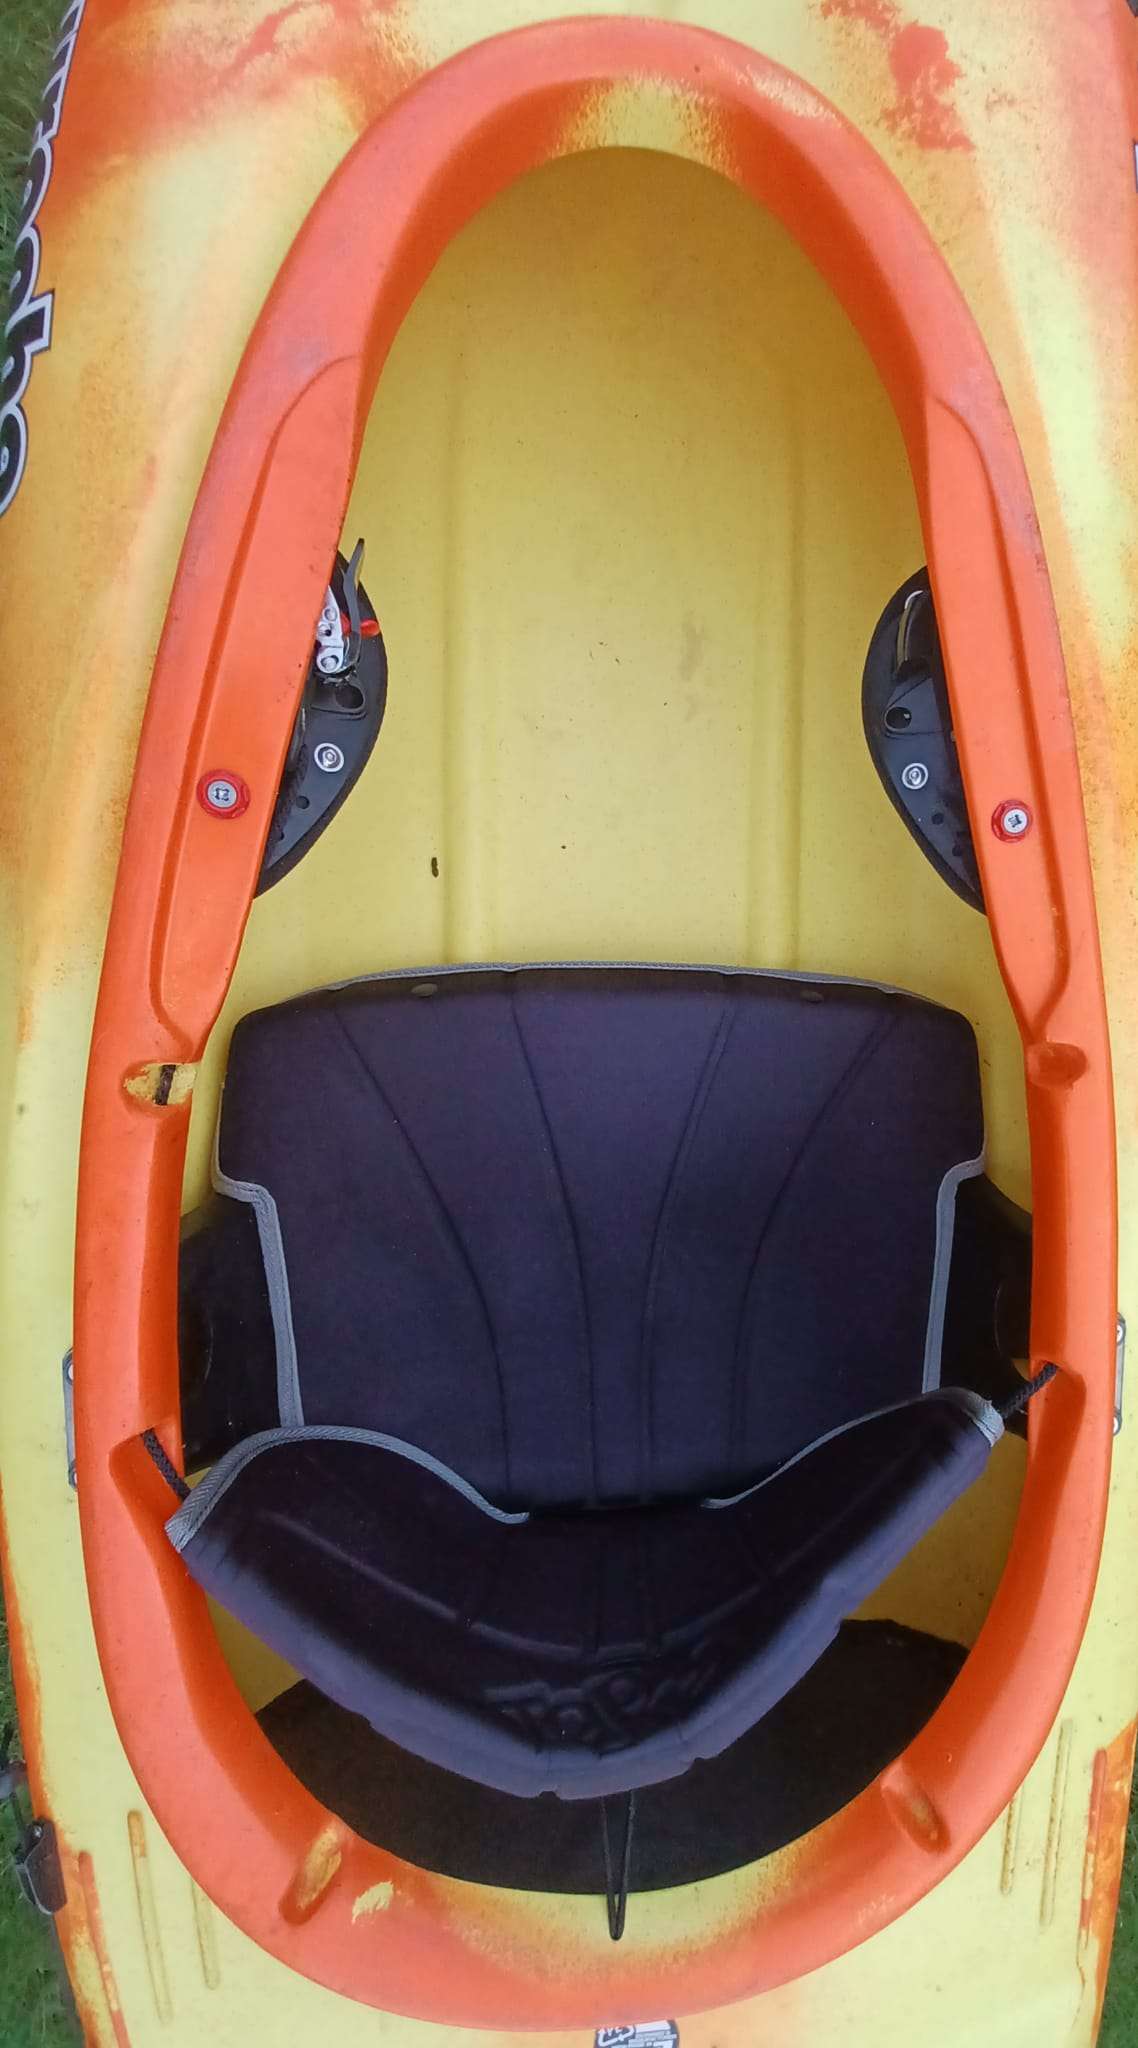 An inside of an orange kayak

Description automatically generated